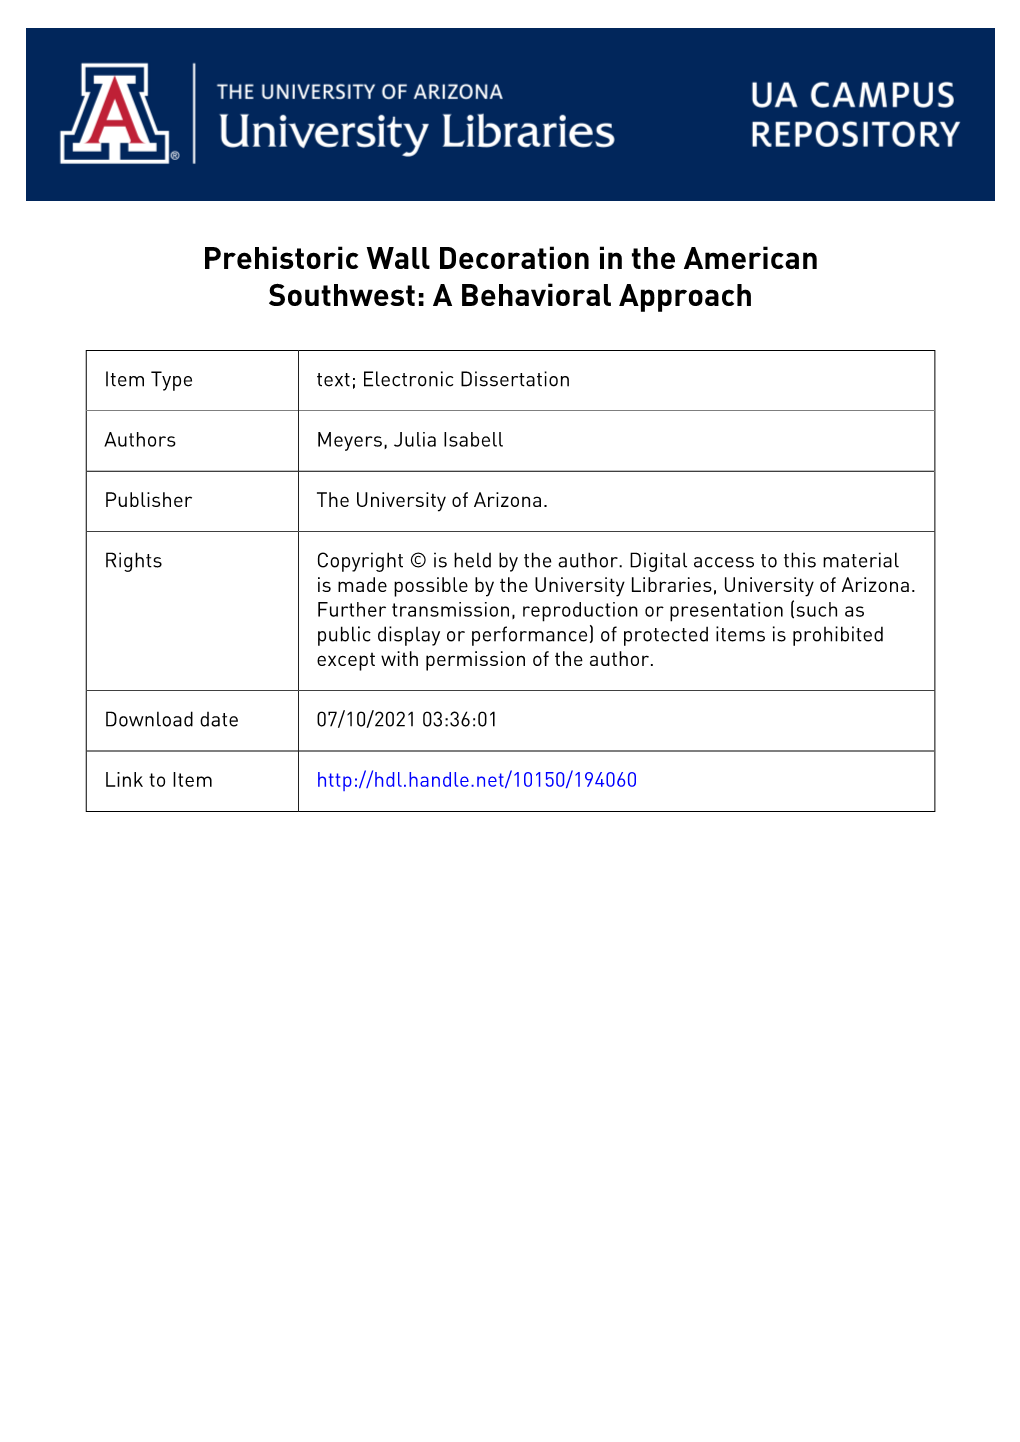 Prehistoric Wall Decoration in the American Southwest: a Behavioral Approach